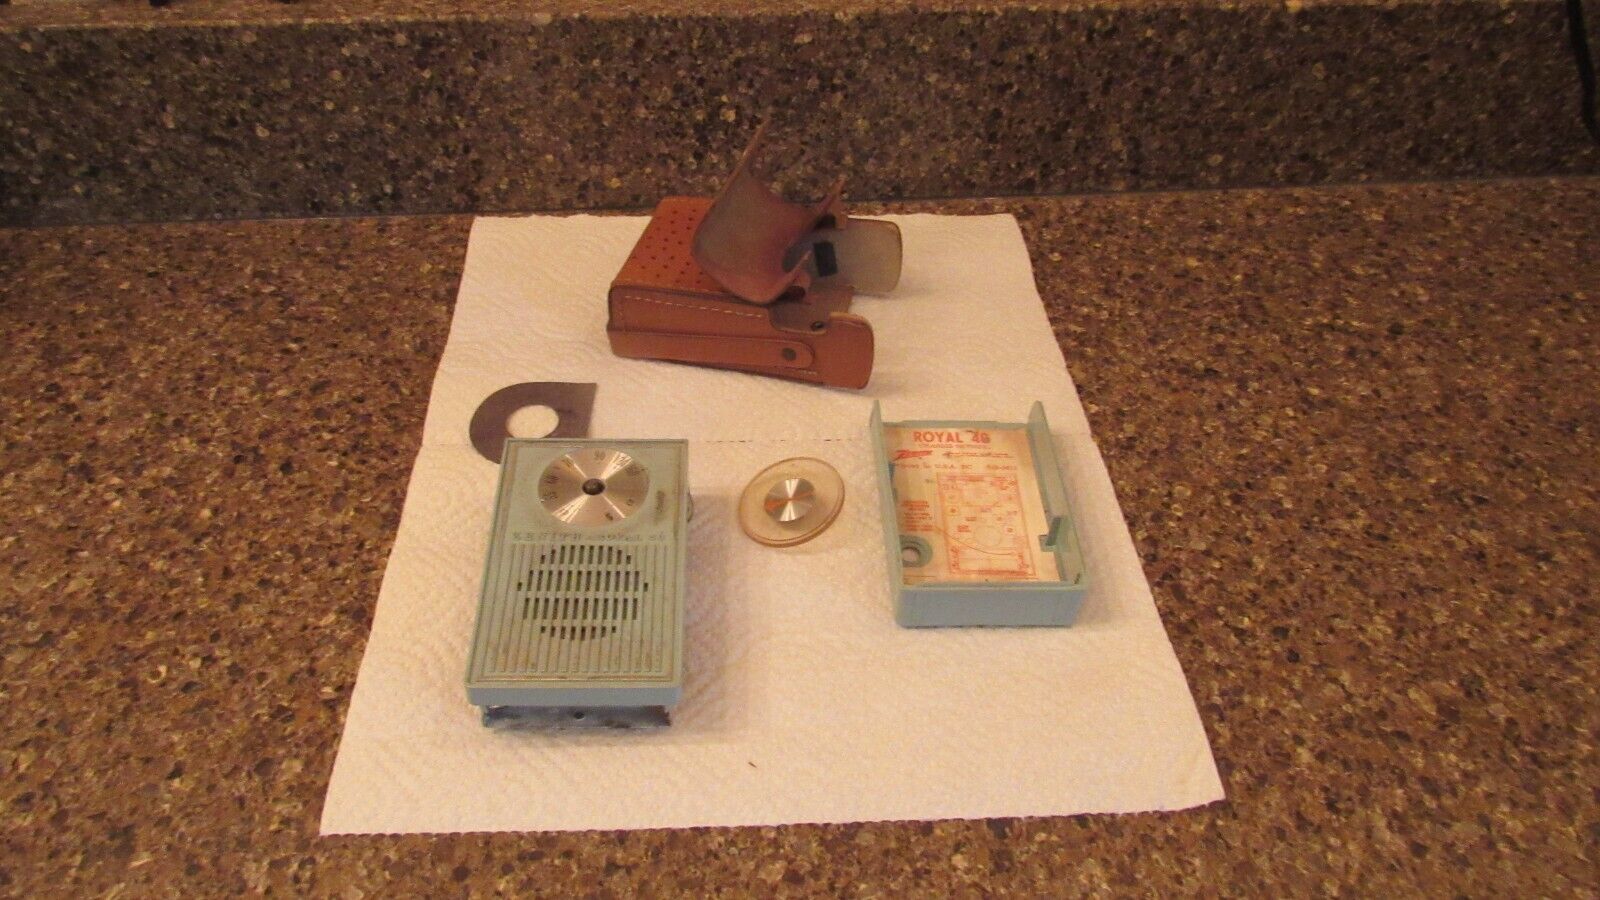 Vintage Zenith Royal 40 Transistor Radio non-working parts or repair with case